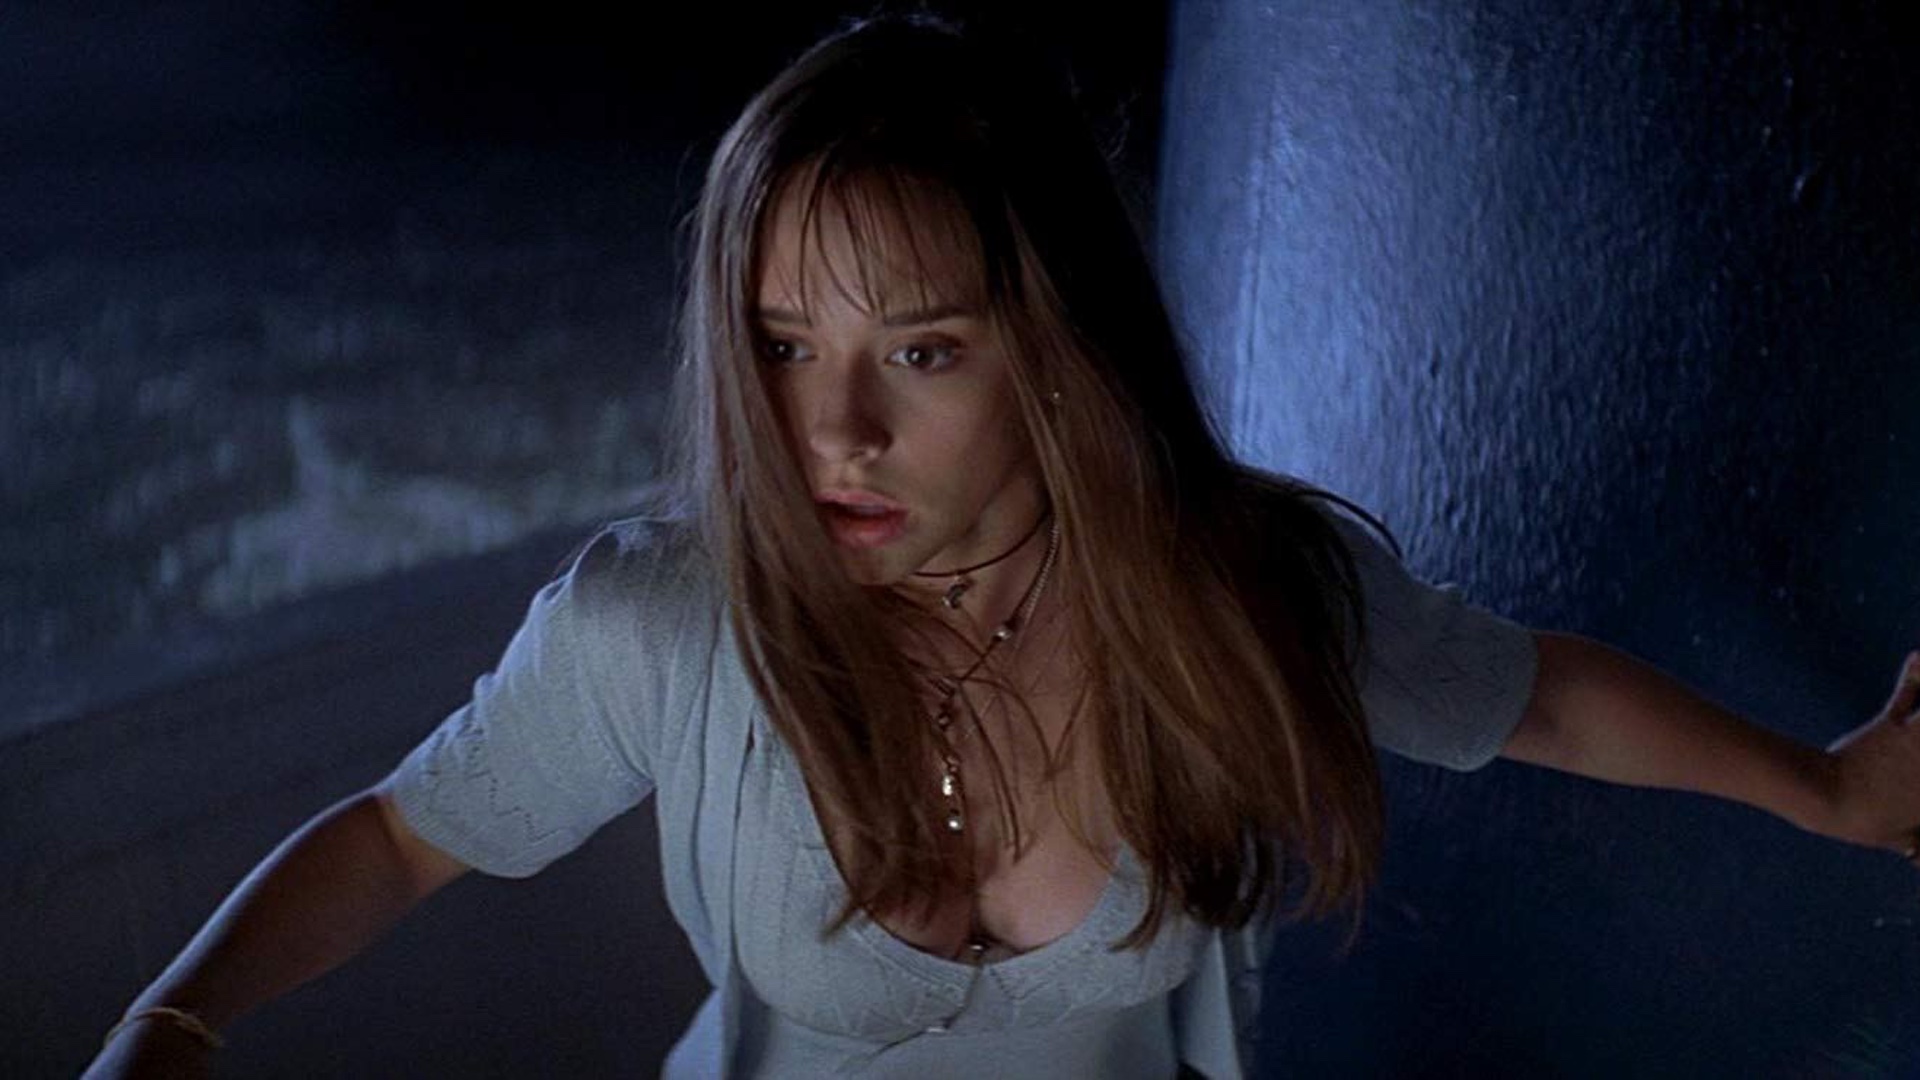 James Wan Producing I KNOW WHAT YOU DID LAST SUMMER Series For Amazon.